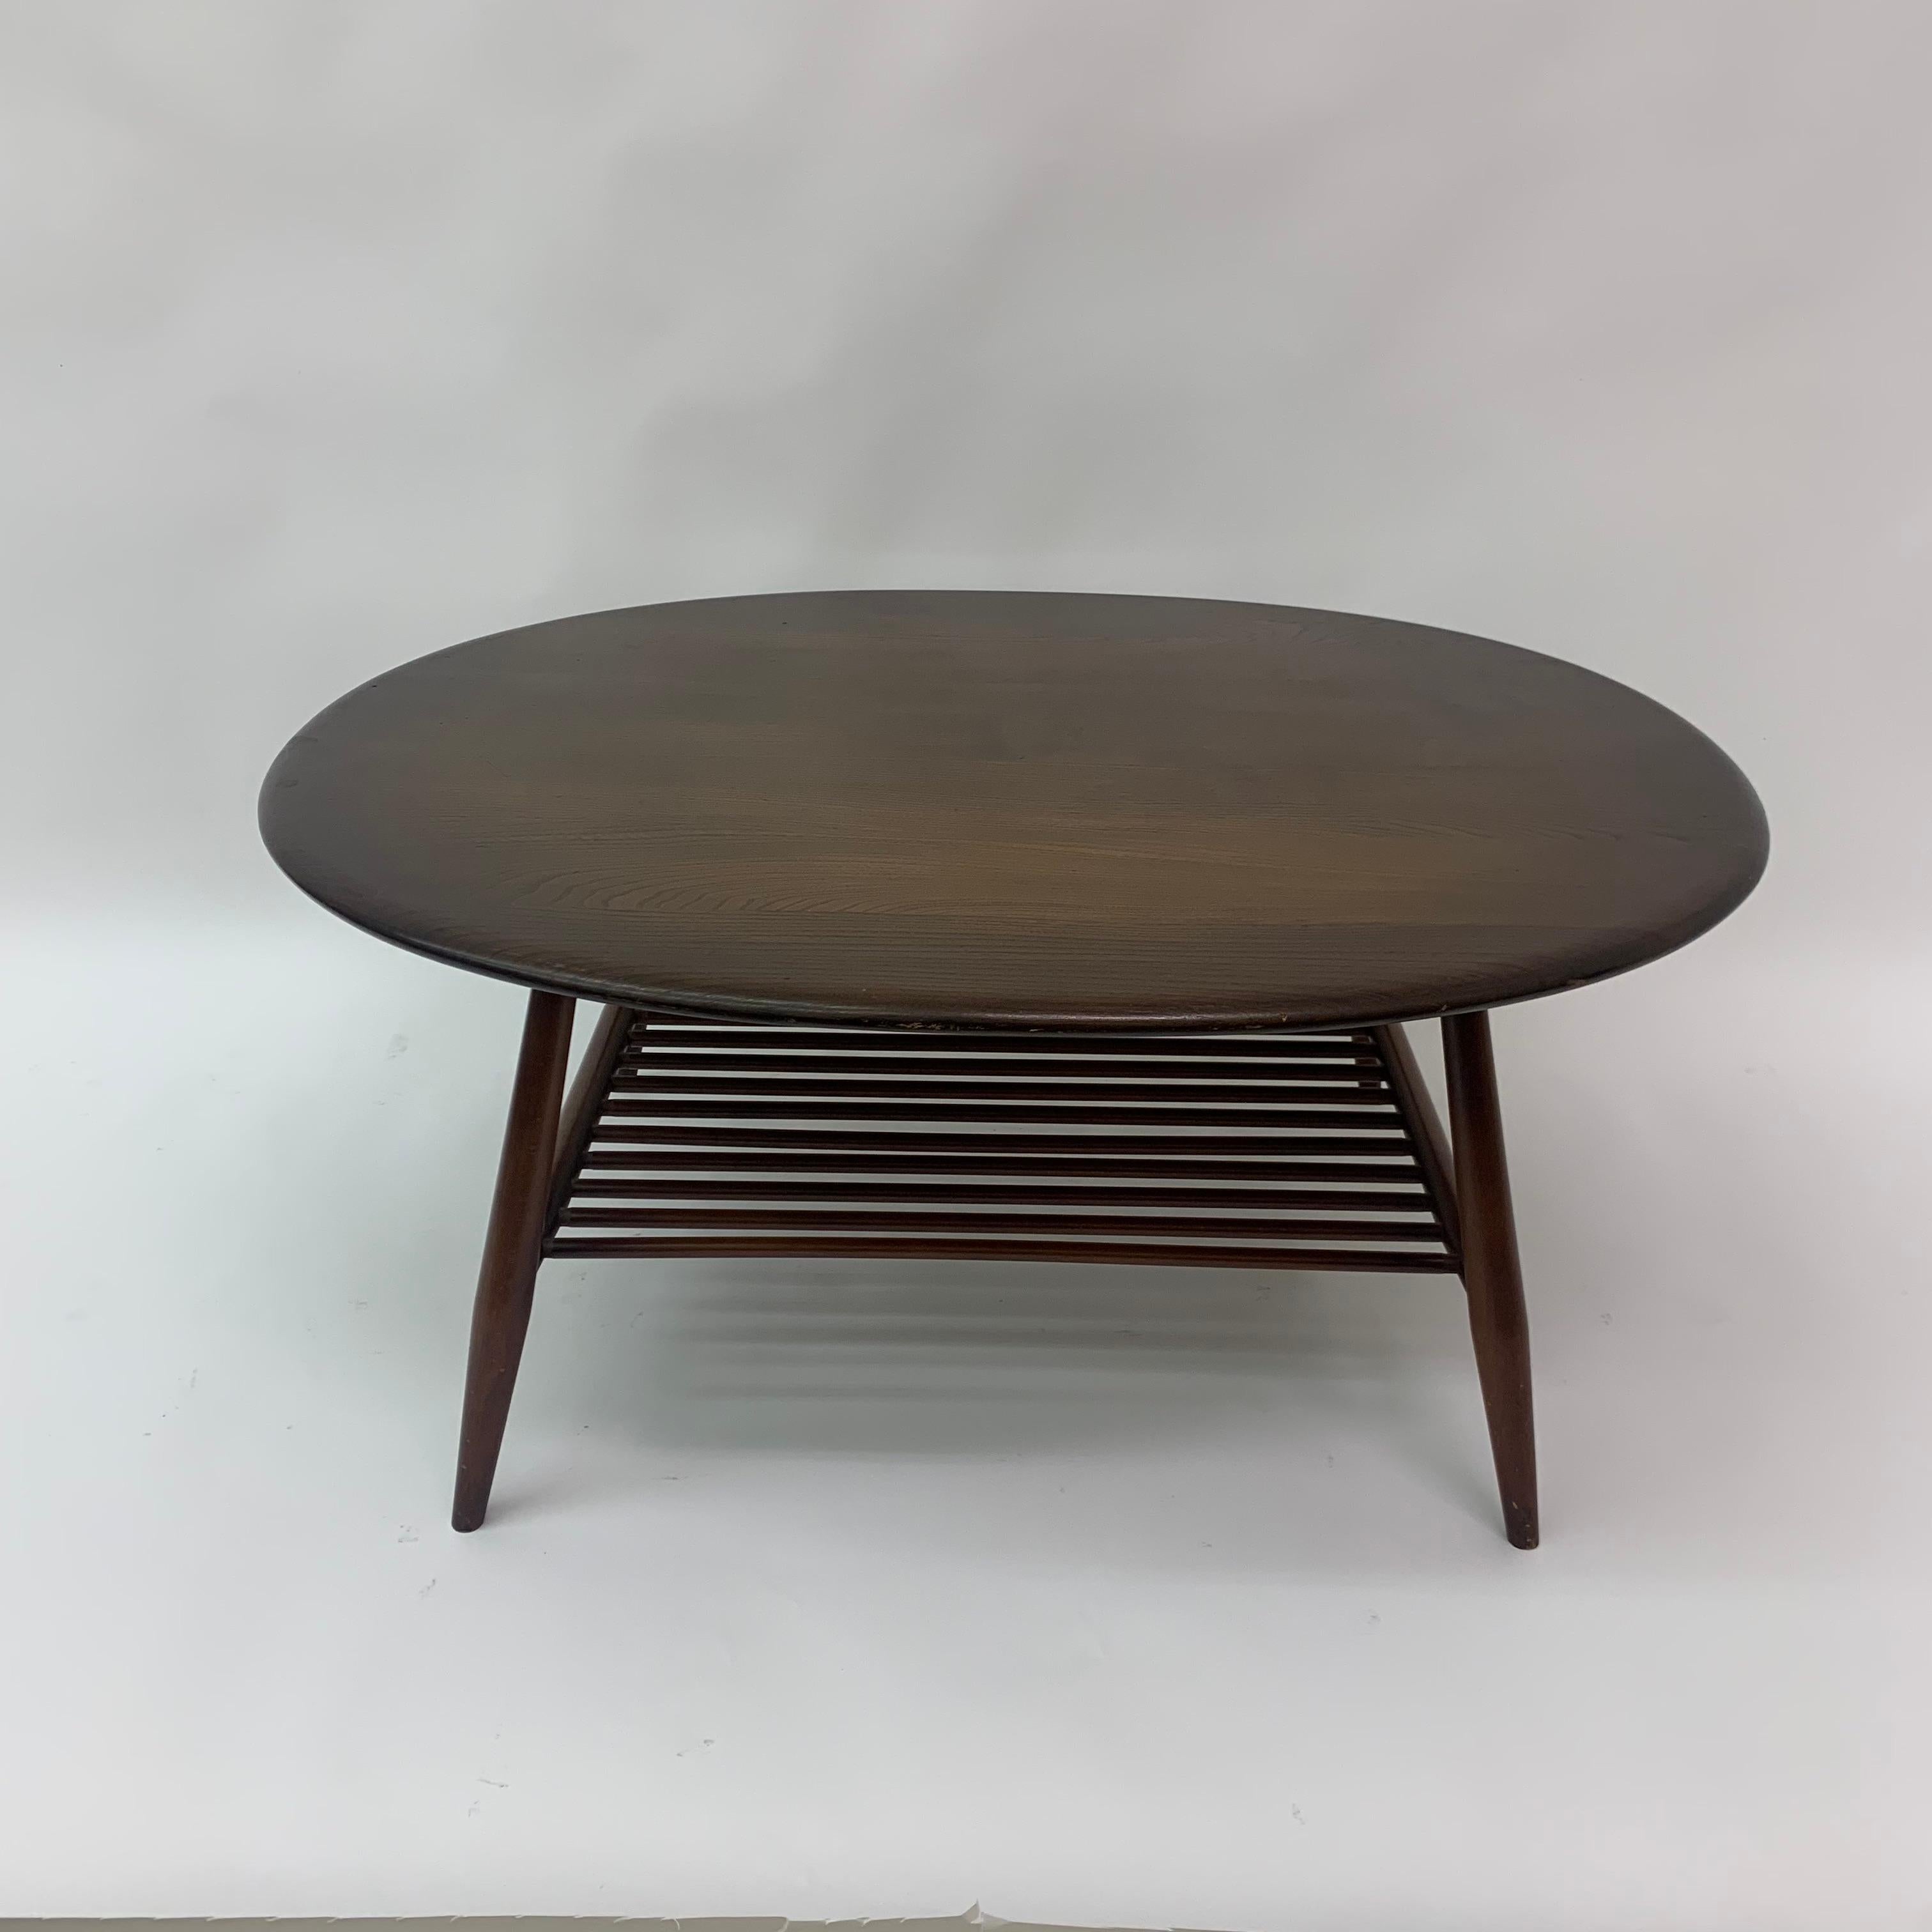 Mid-Century Modern Large Oval Coffee Table by Lucian Randolph Ercolani for Ercol, England, 1950s